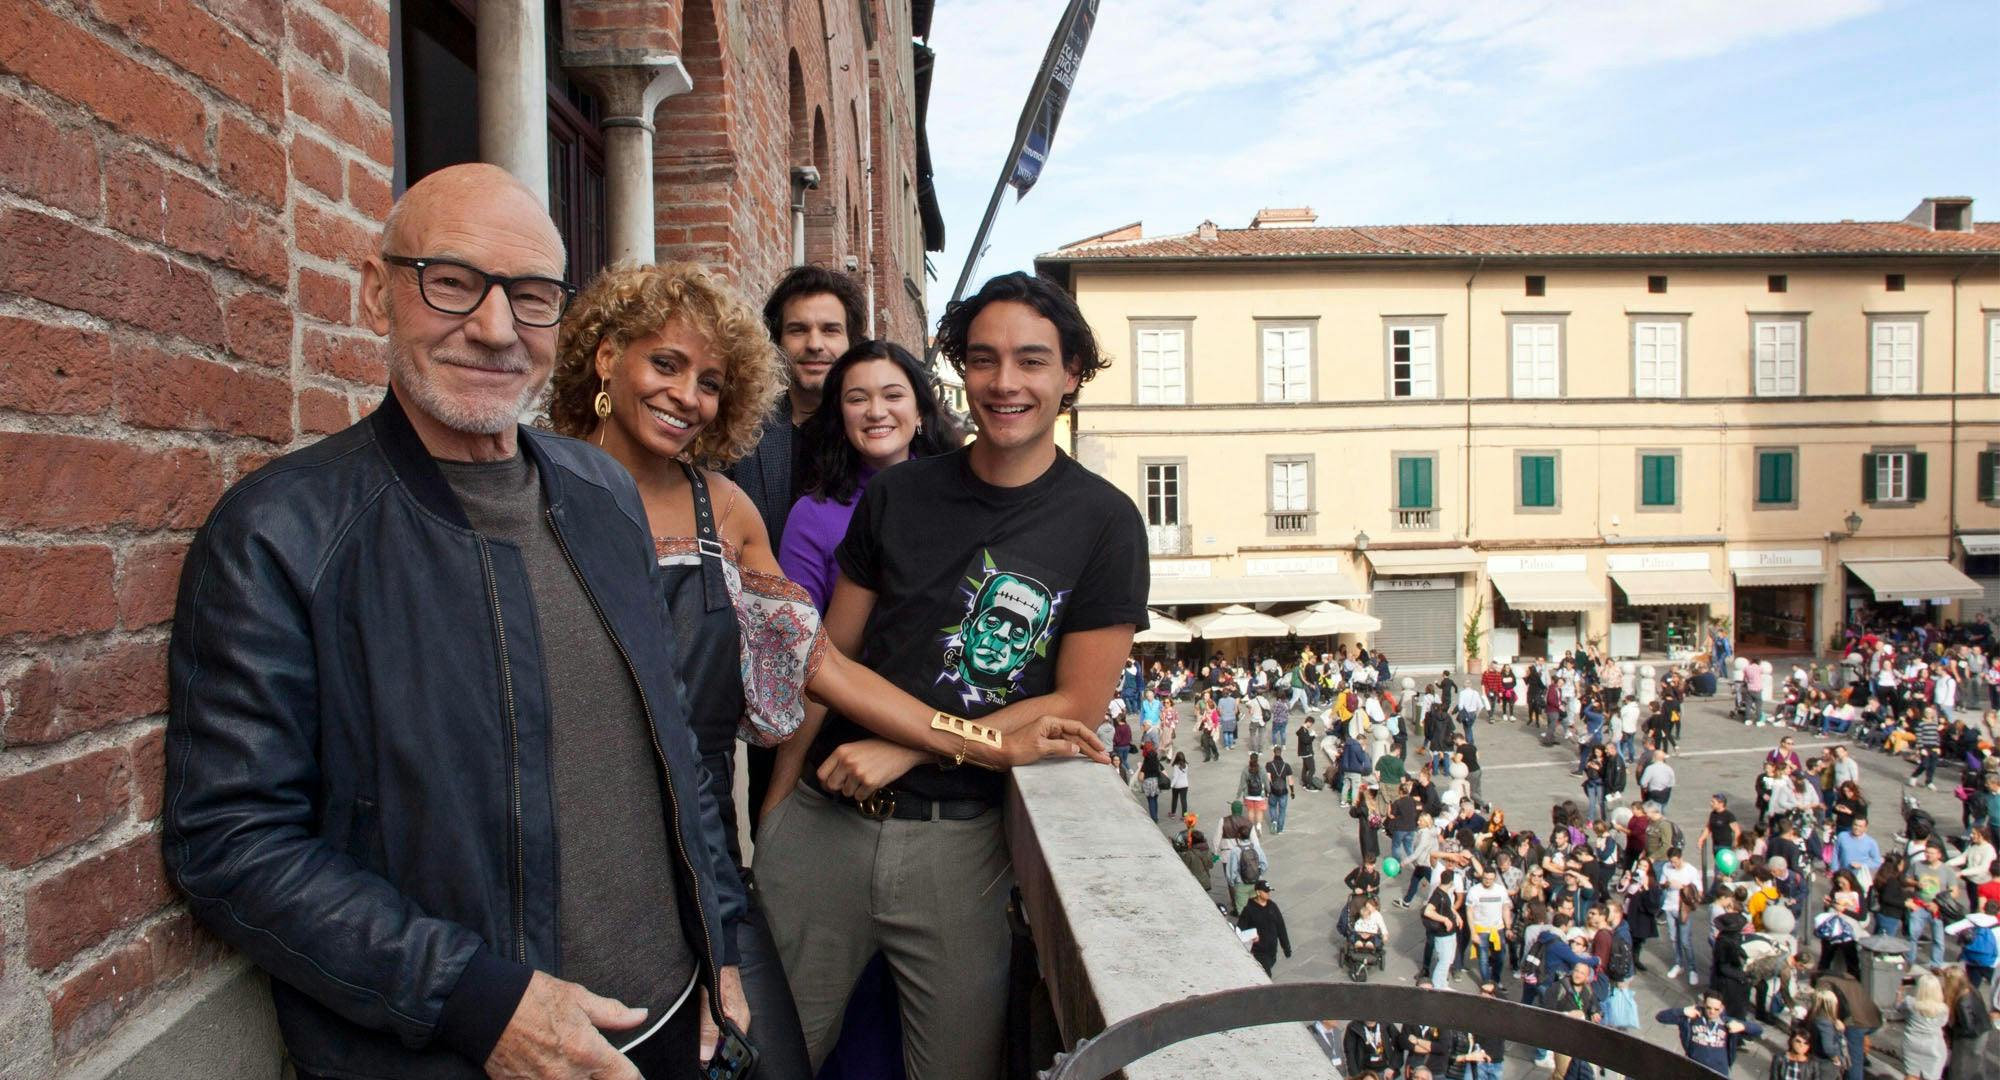 Star Trek: Picard cast appears at Lucca Comics and Games Festival 